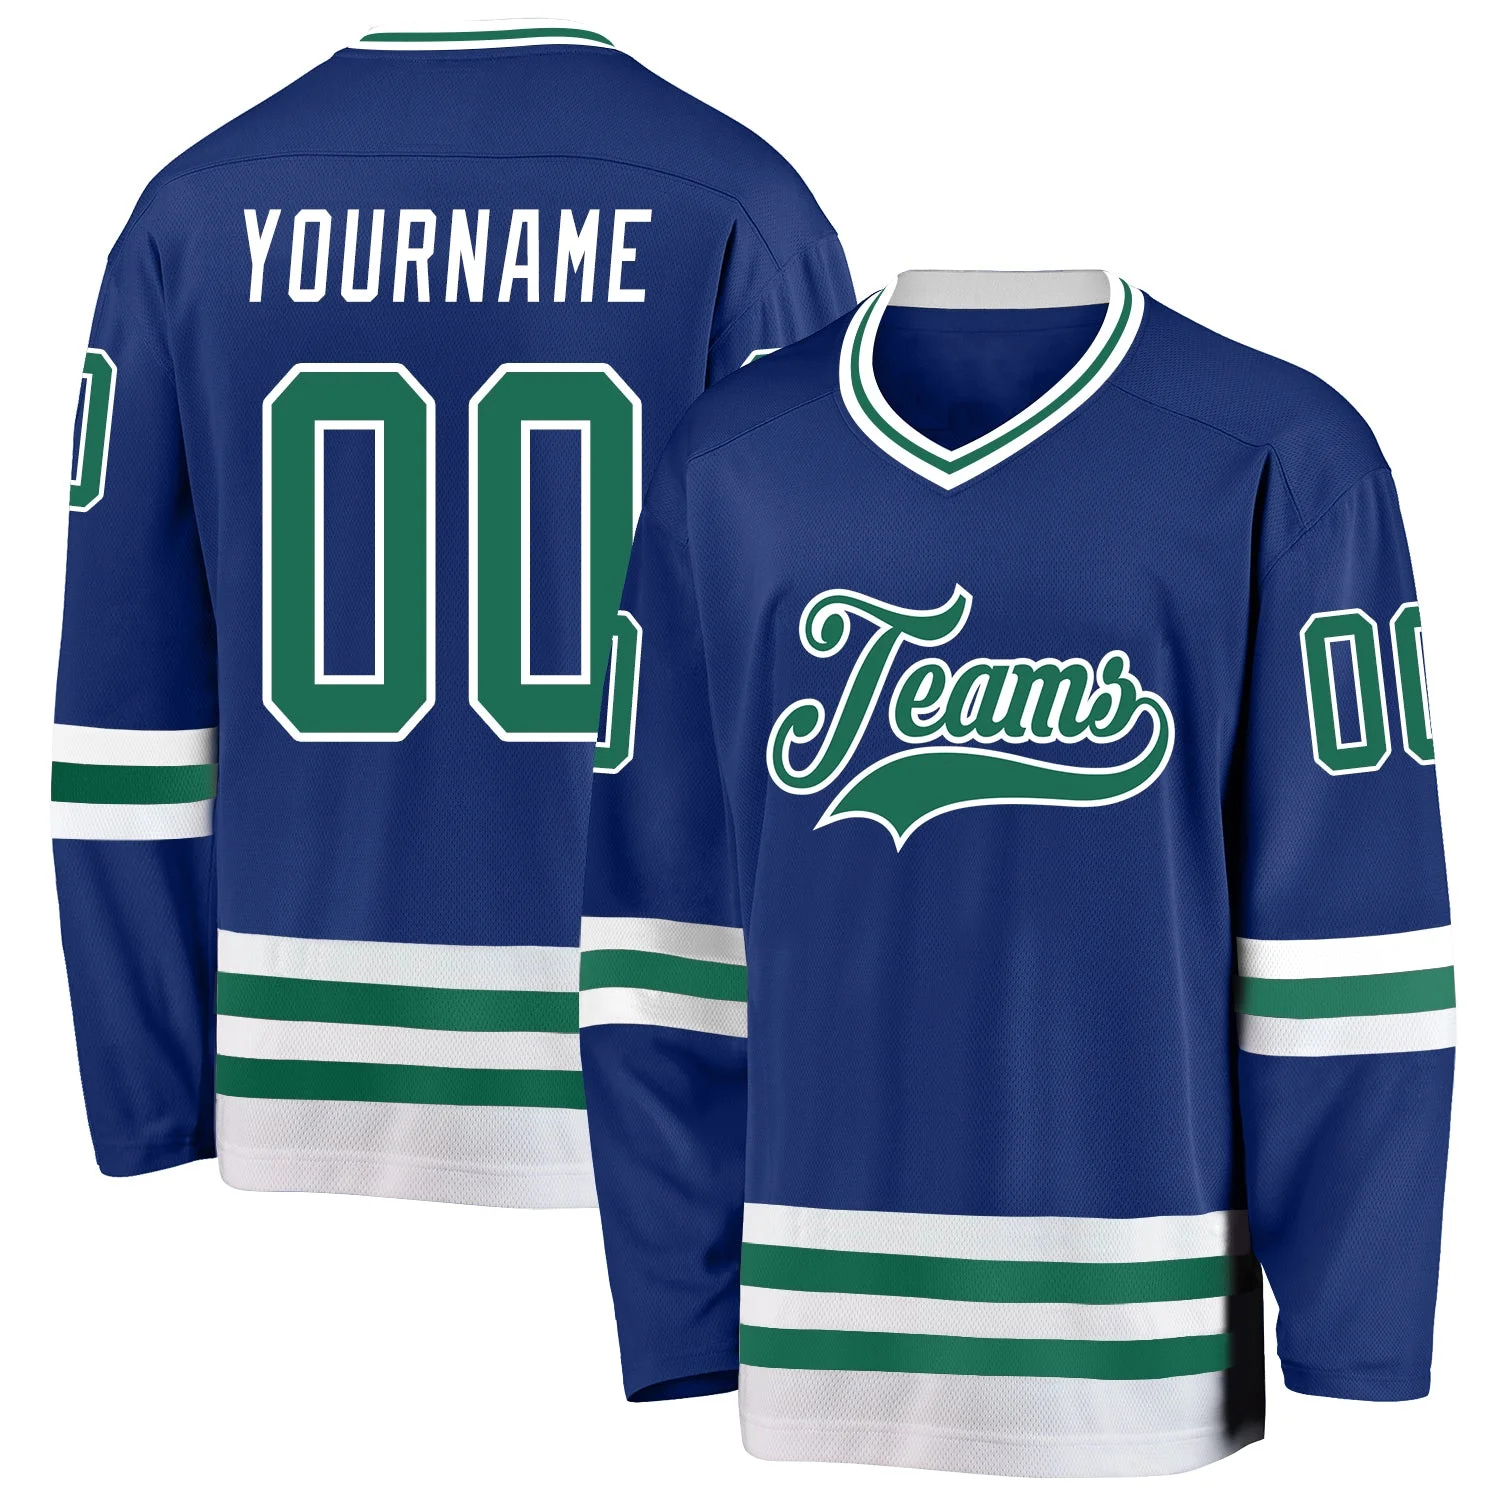 Stitched And Print Royal Kelly Green-white Hockey Jersey Custom